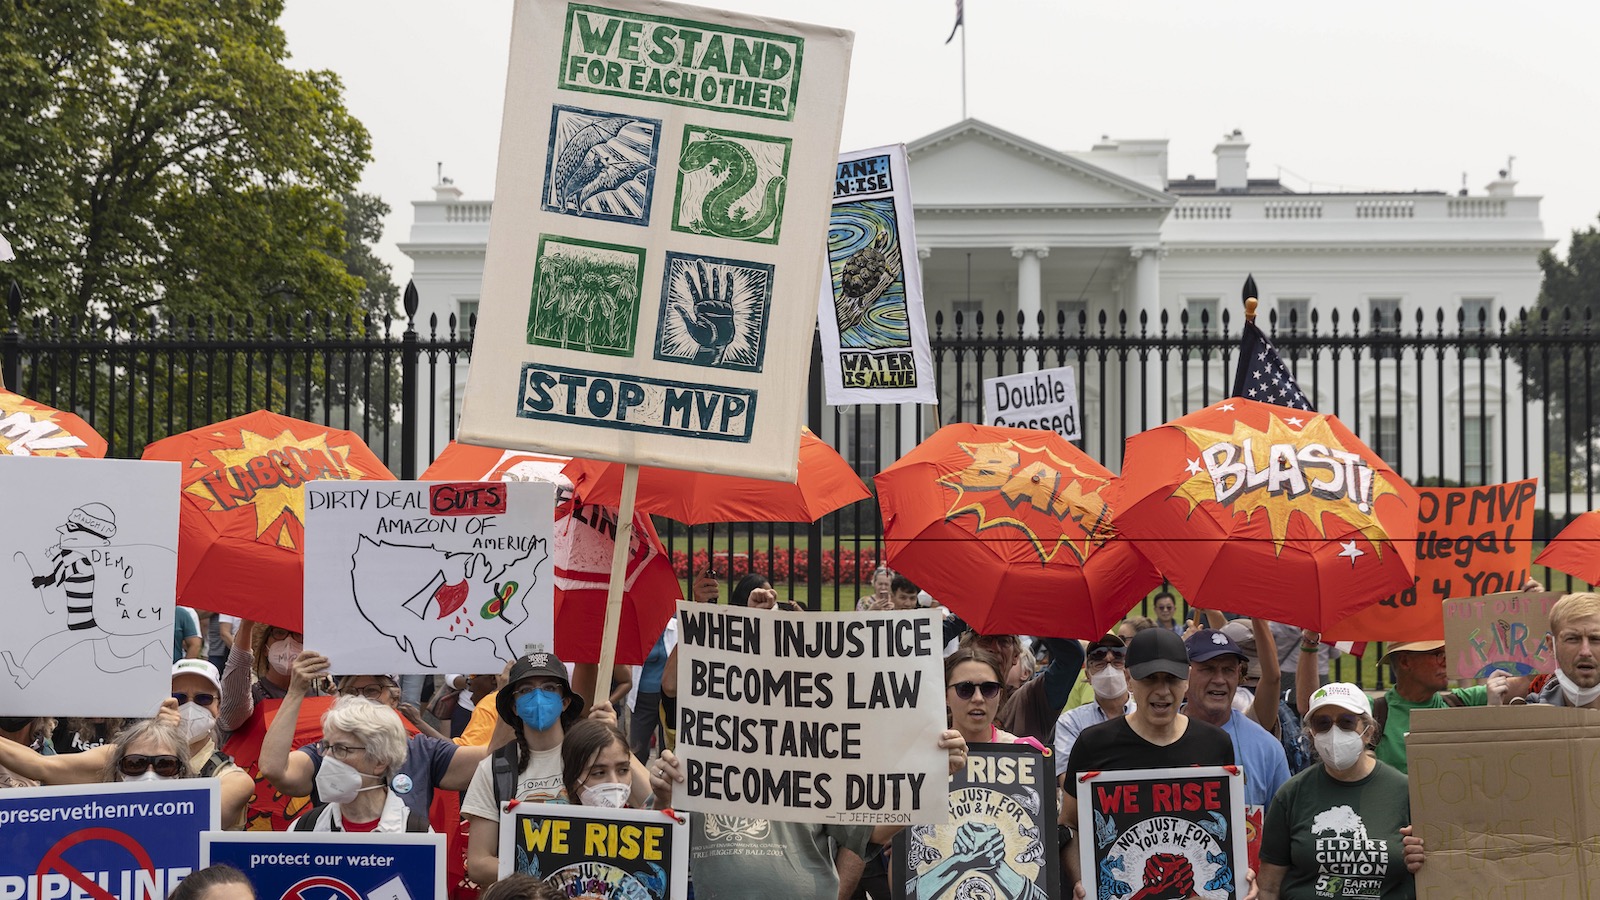 A crowd of protesters with Stop Mountain Valley Pipeline rally and wave pickets in front of the White House.